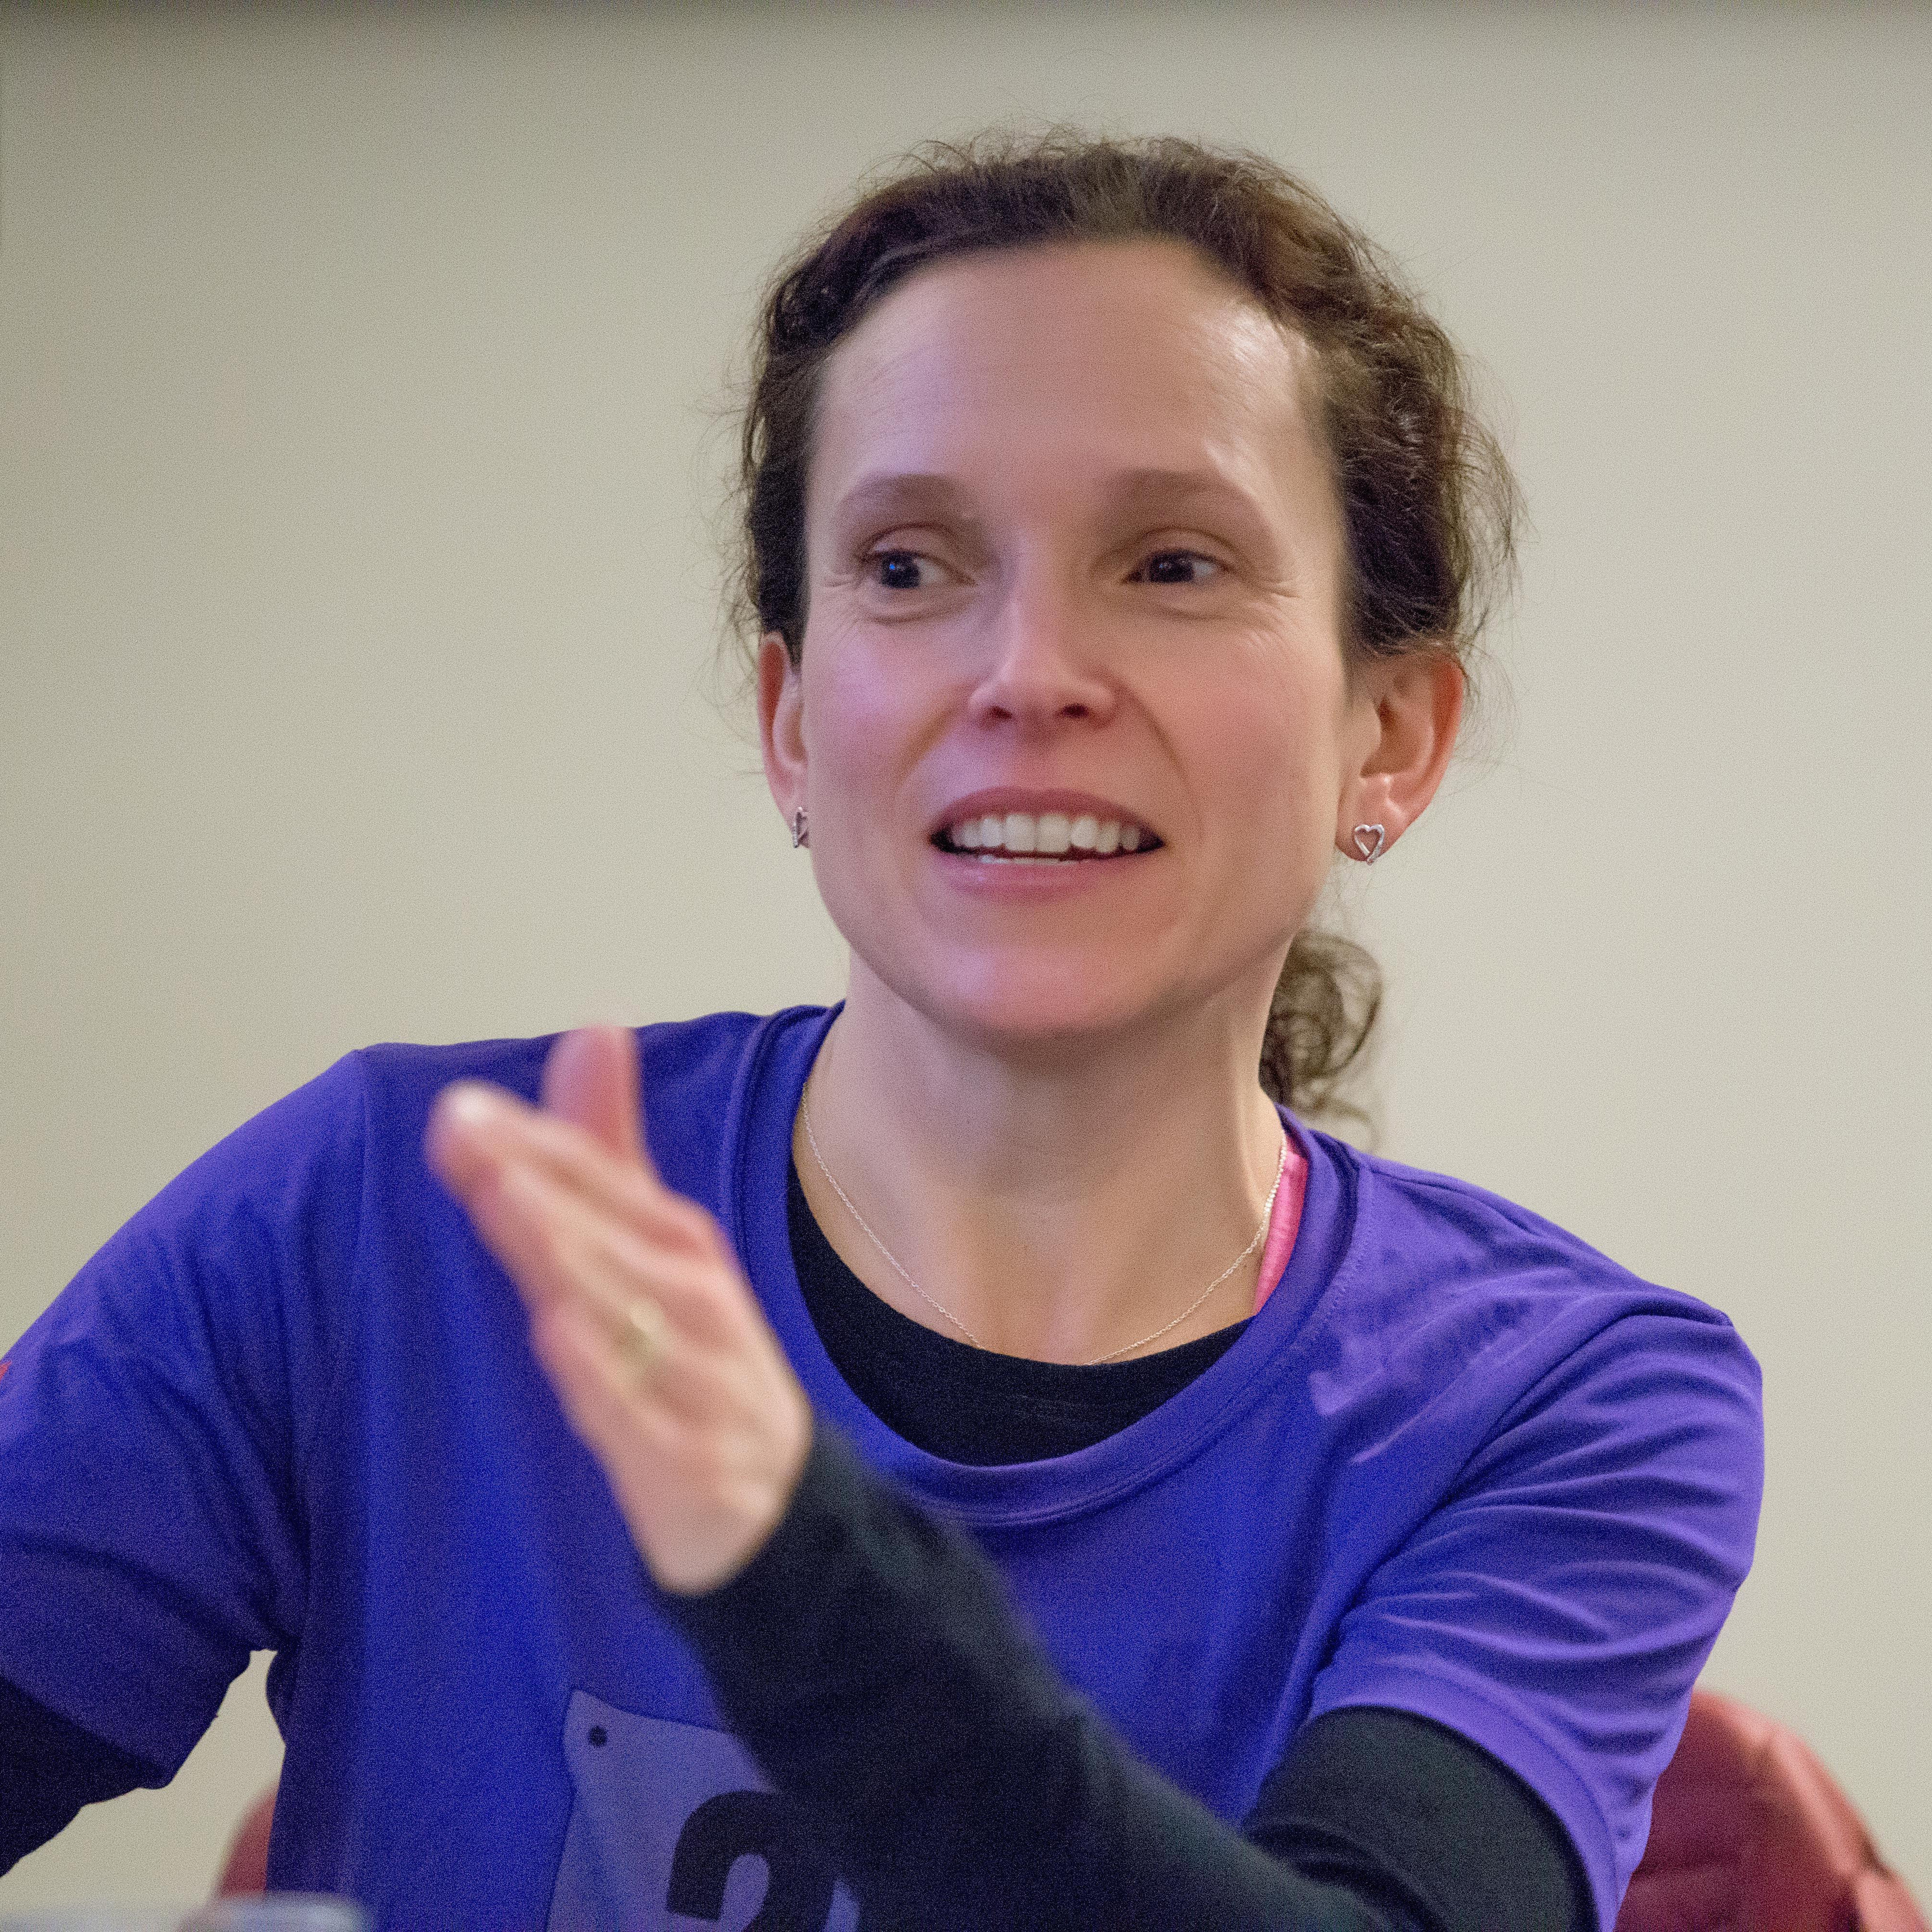 Woman in purple 261 Fearless shirt gestures during a discussion, visibly engaged and passionate, at an indoor meeting